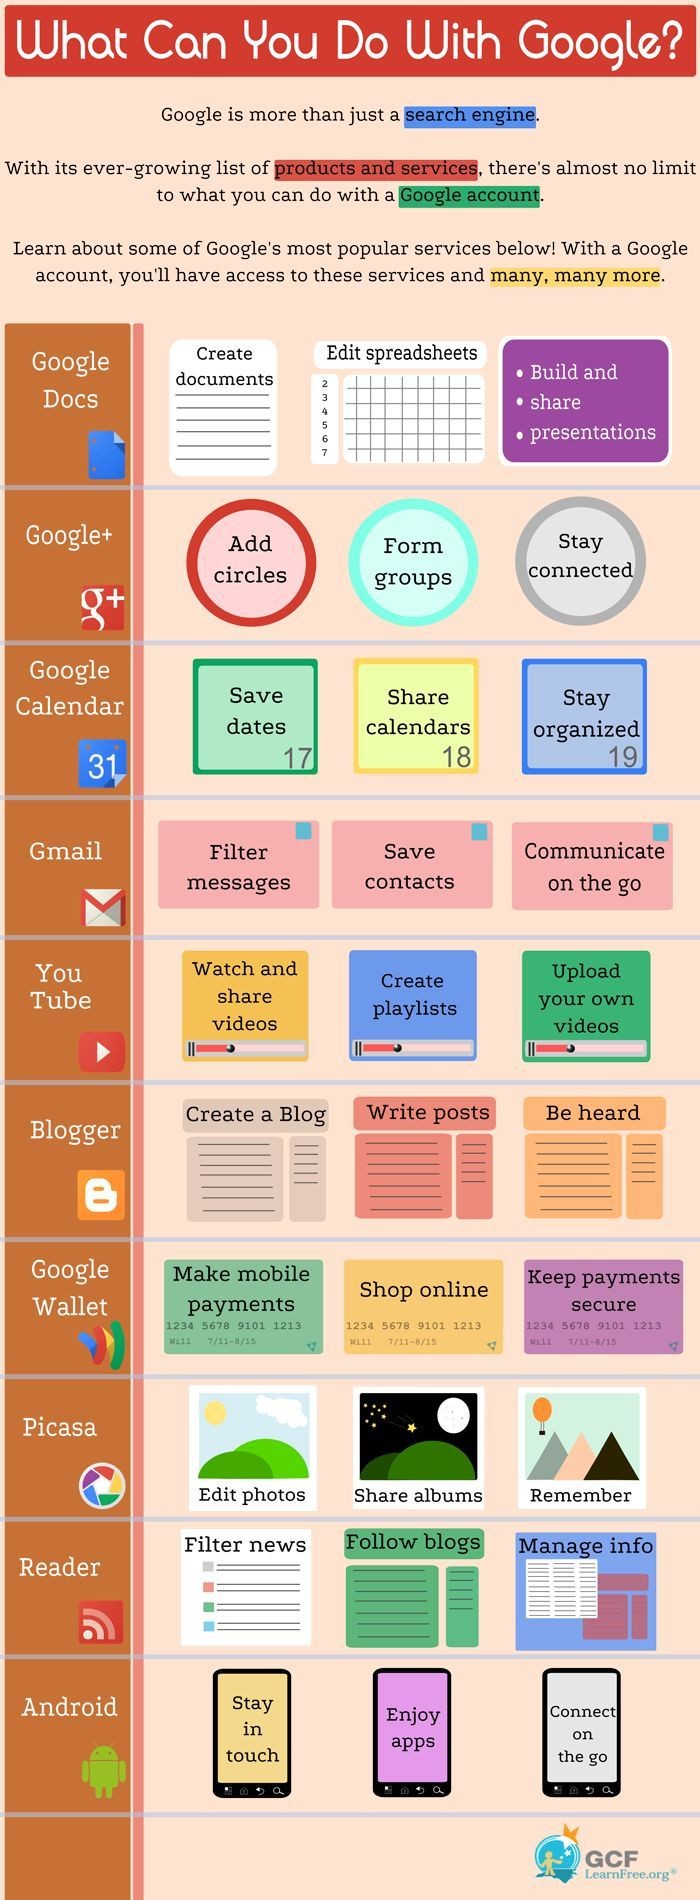 30 Simple Ways You Should Be Using Google. So usef...